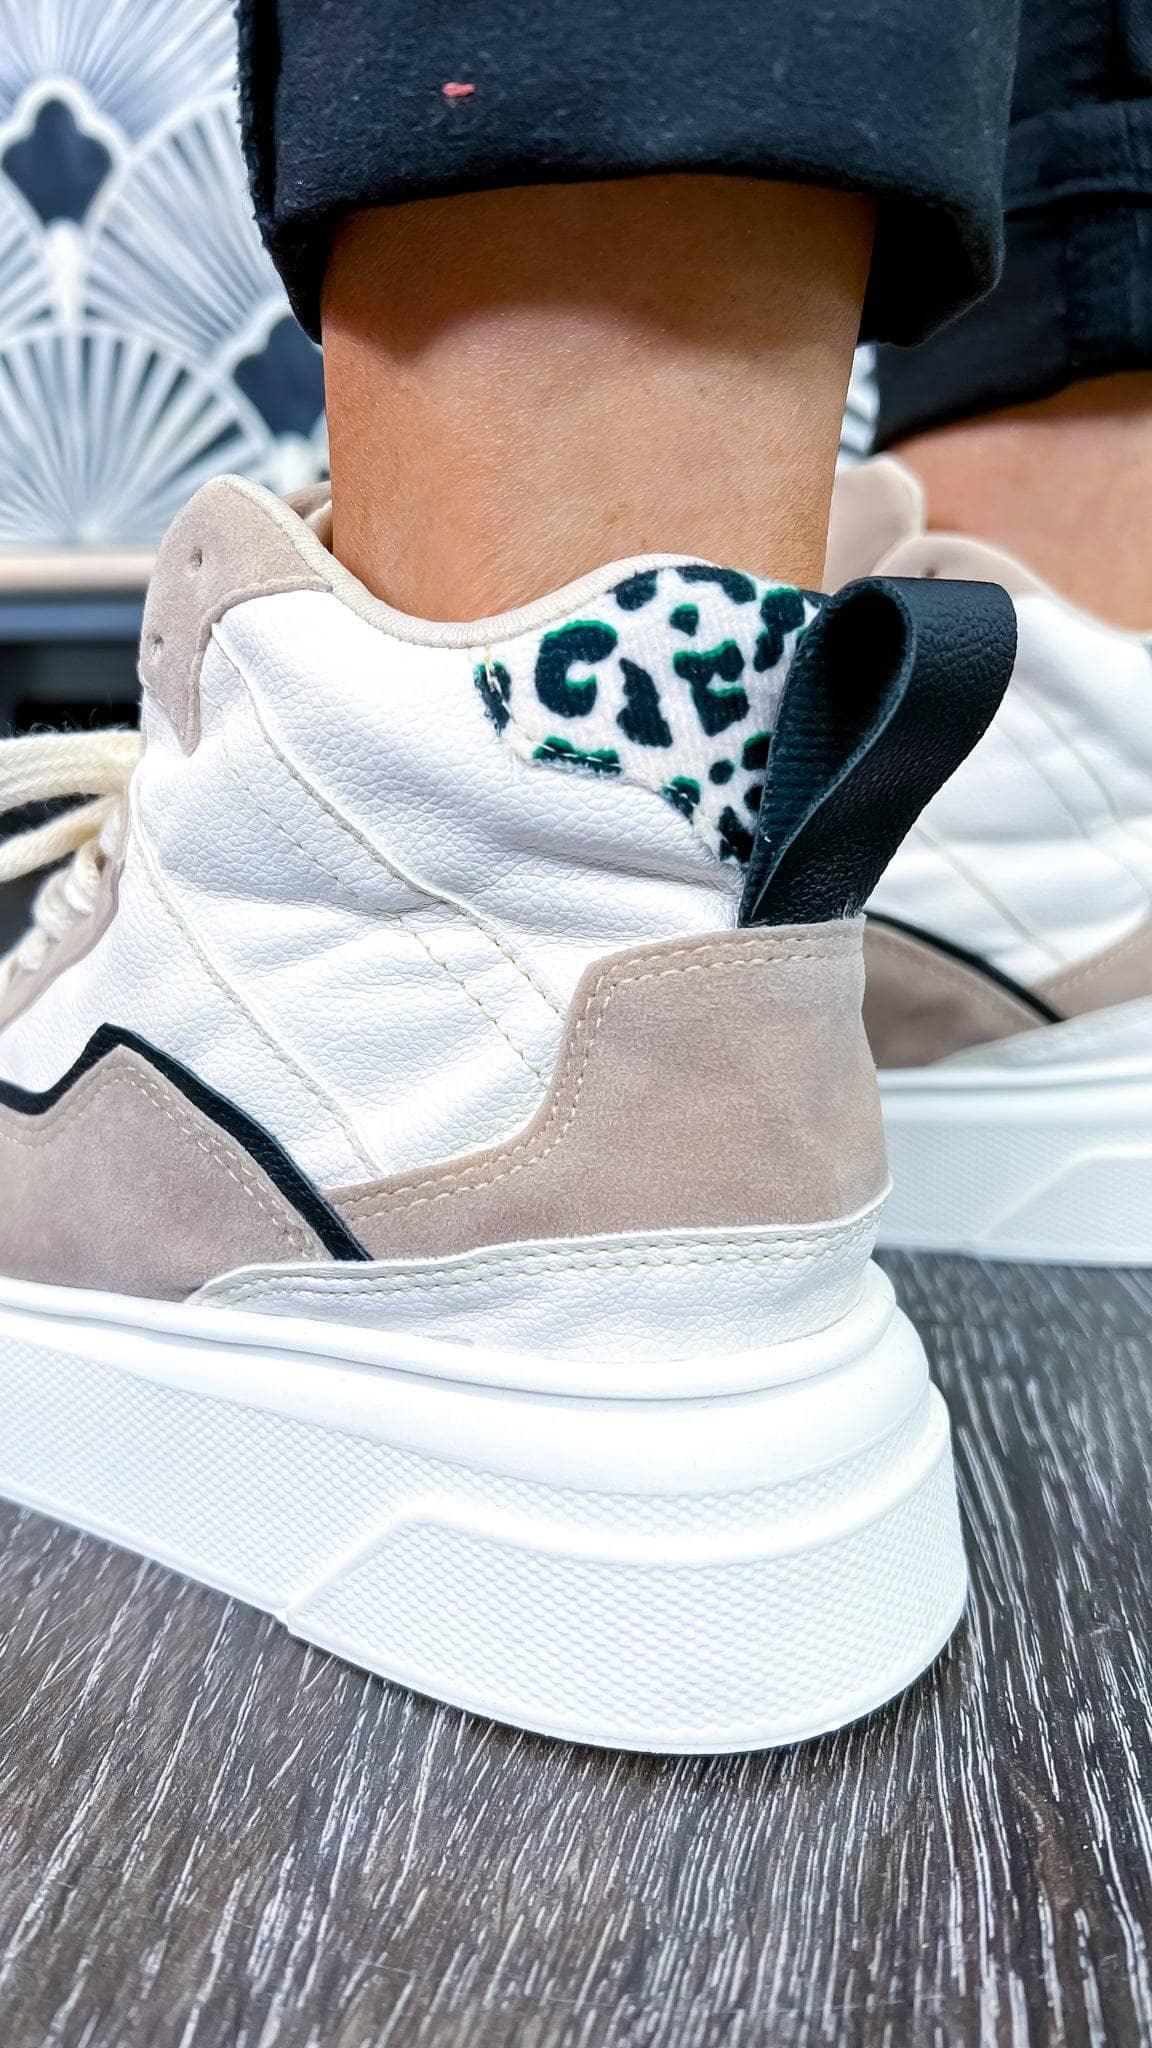 Euro High Top Sneakers - The ZigZag Stripe